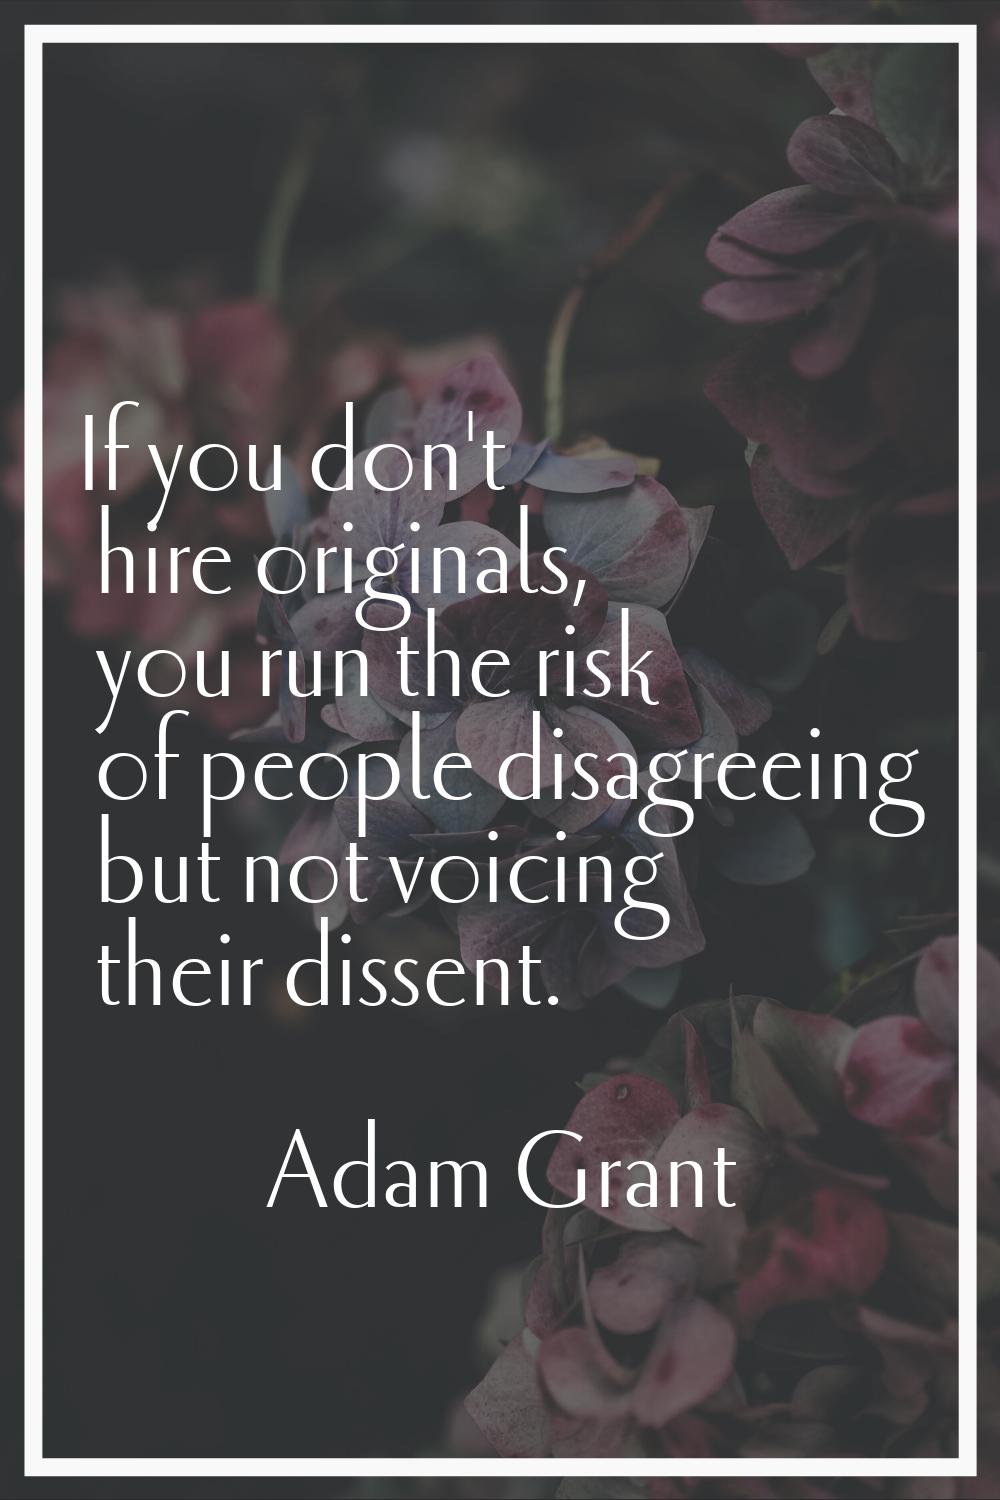 If you don't hire originals, you run the risk of people disagreeing but not voicing their dissent.